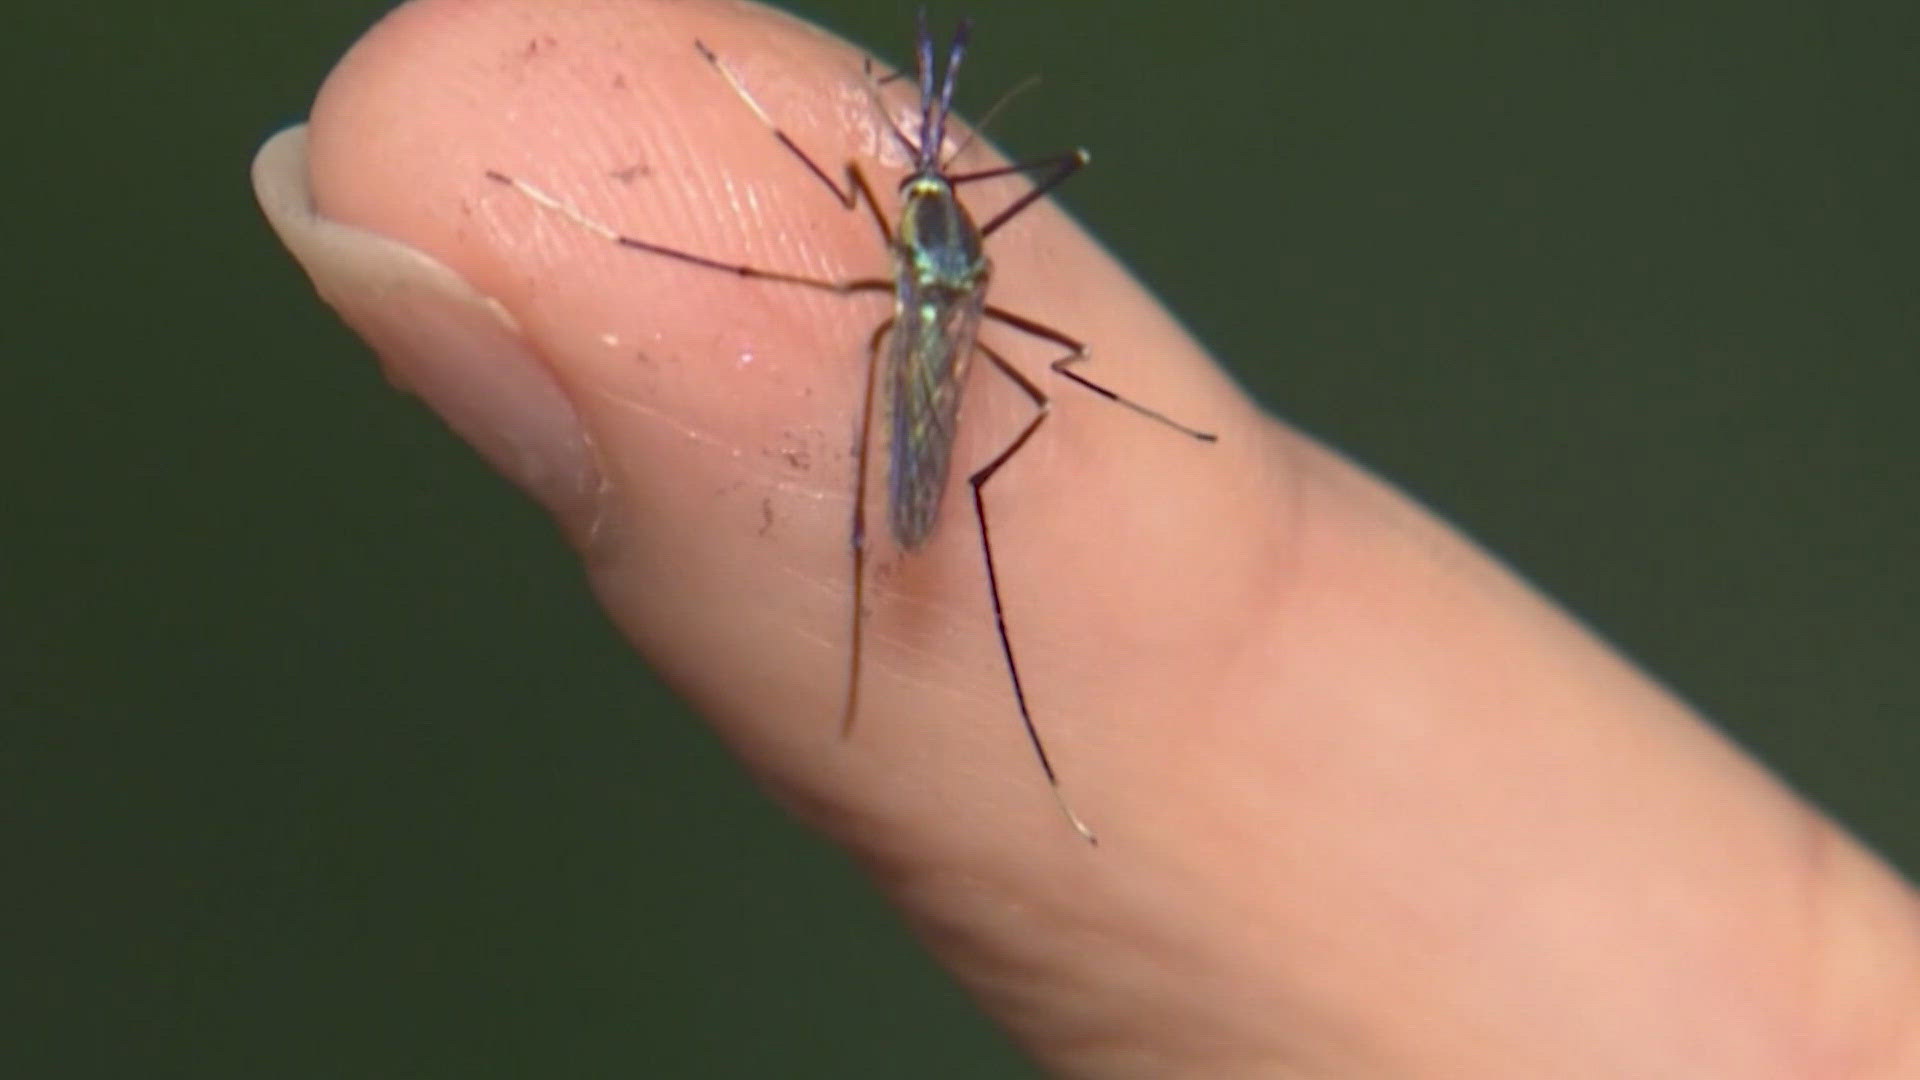 Mosquito samples in Dallas have tested positive for the West Nile Virus.